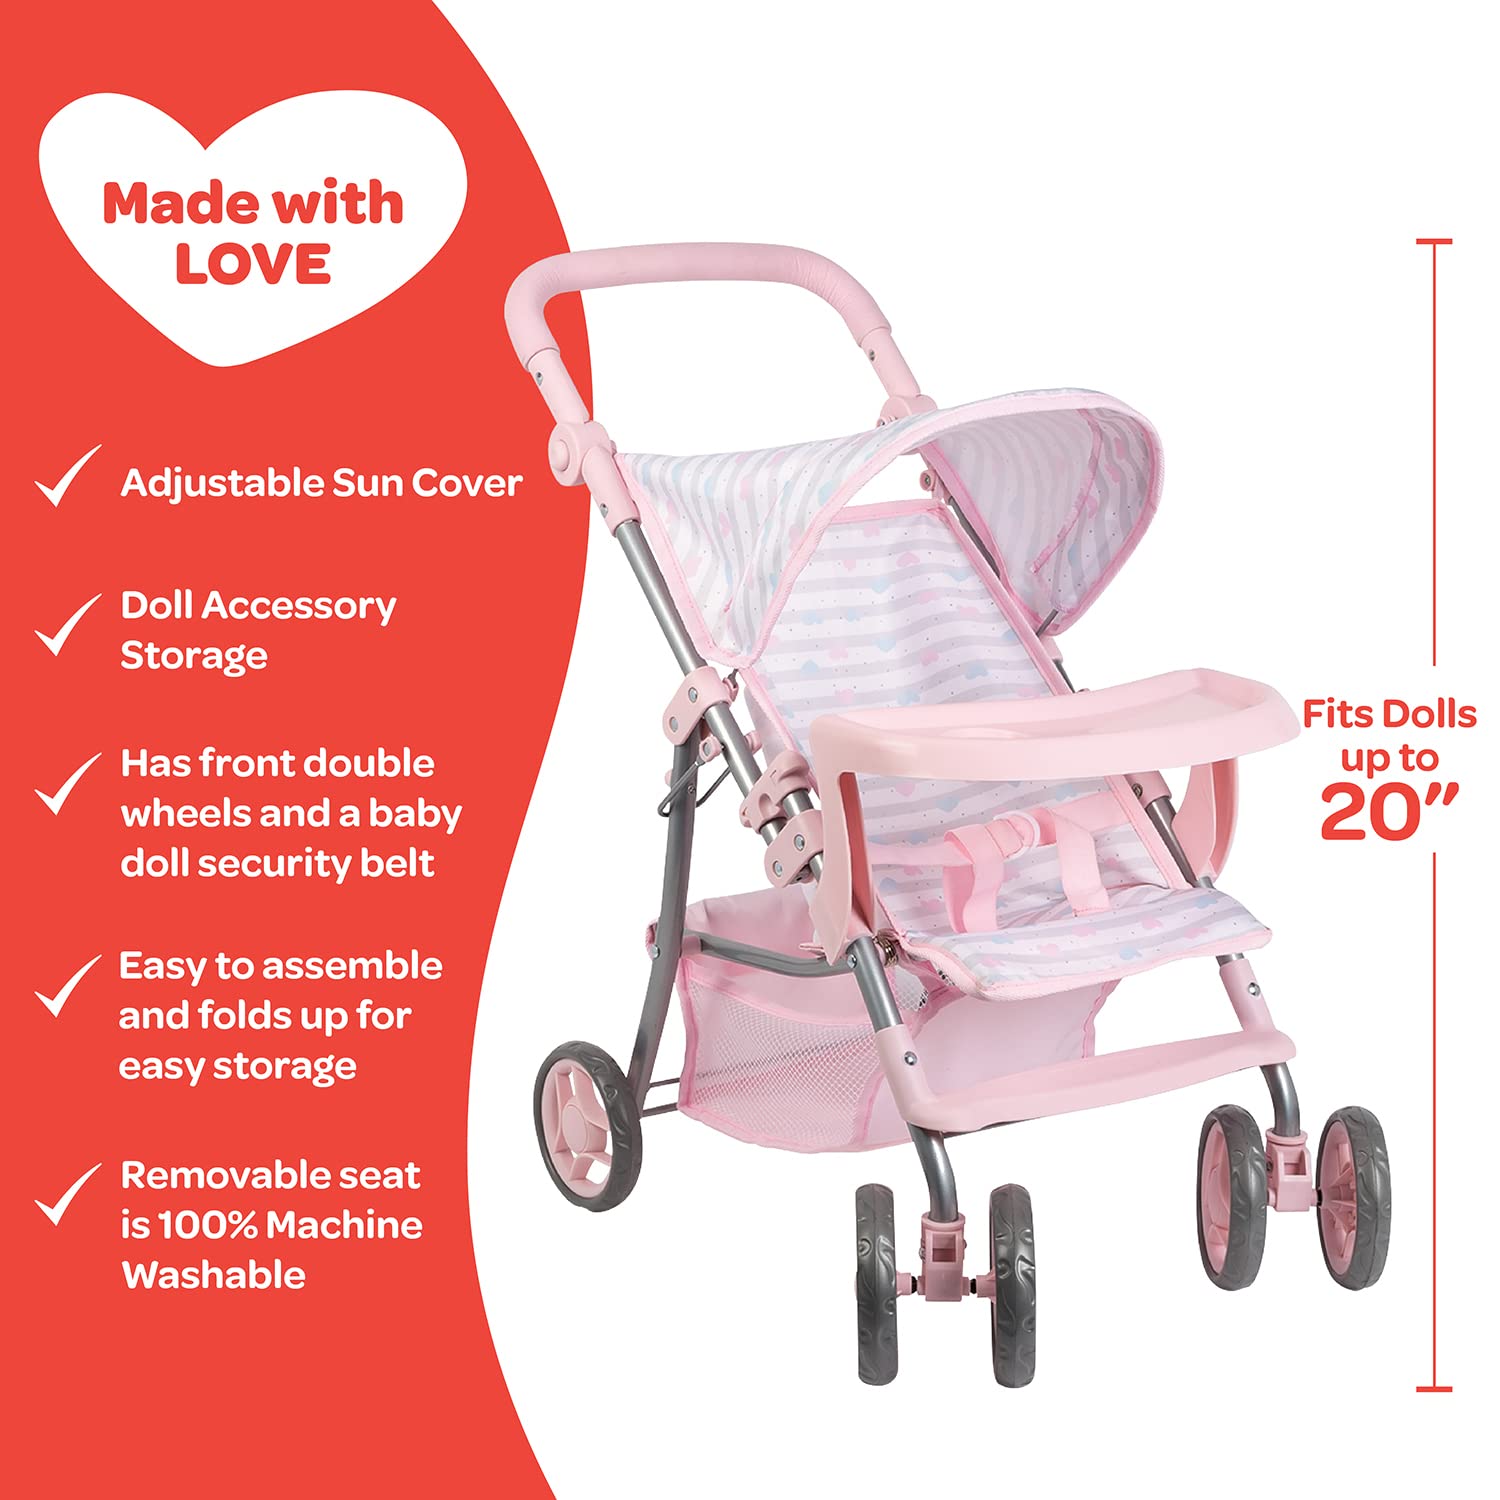 Adora Baby Doll Stroller Pink Snack N Go Shade Stroller, Can Fit Up to 20 inch Dolls and Stuffed Animals